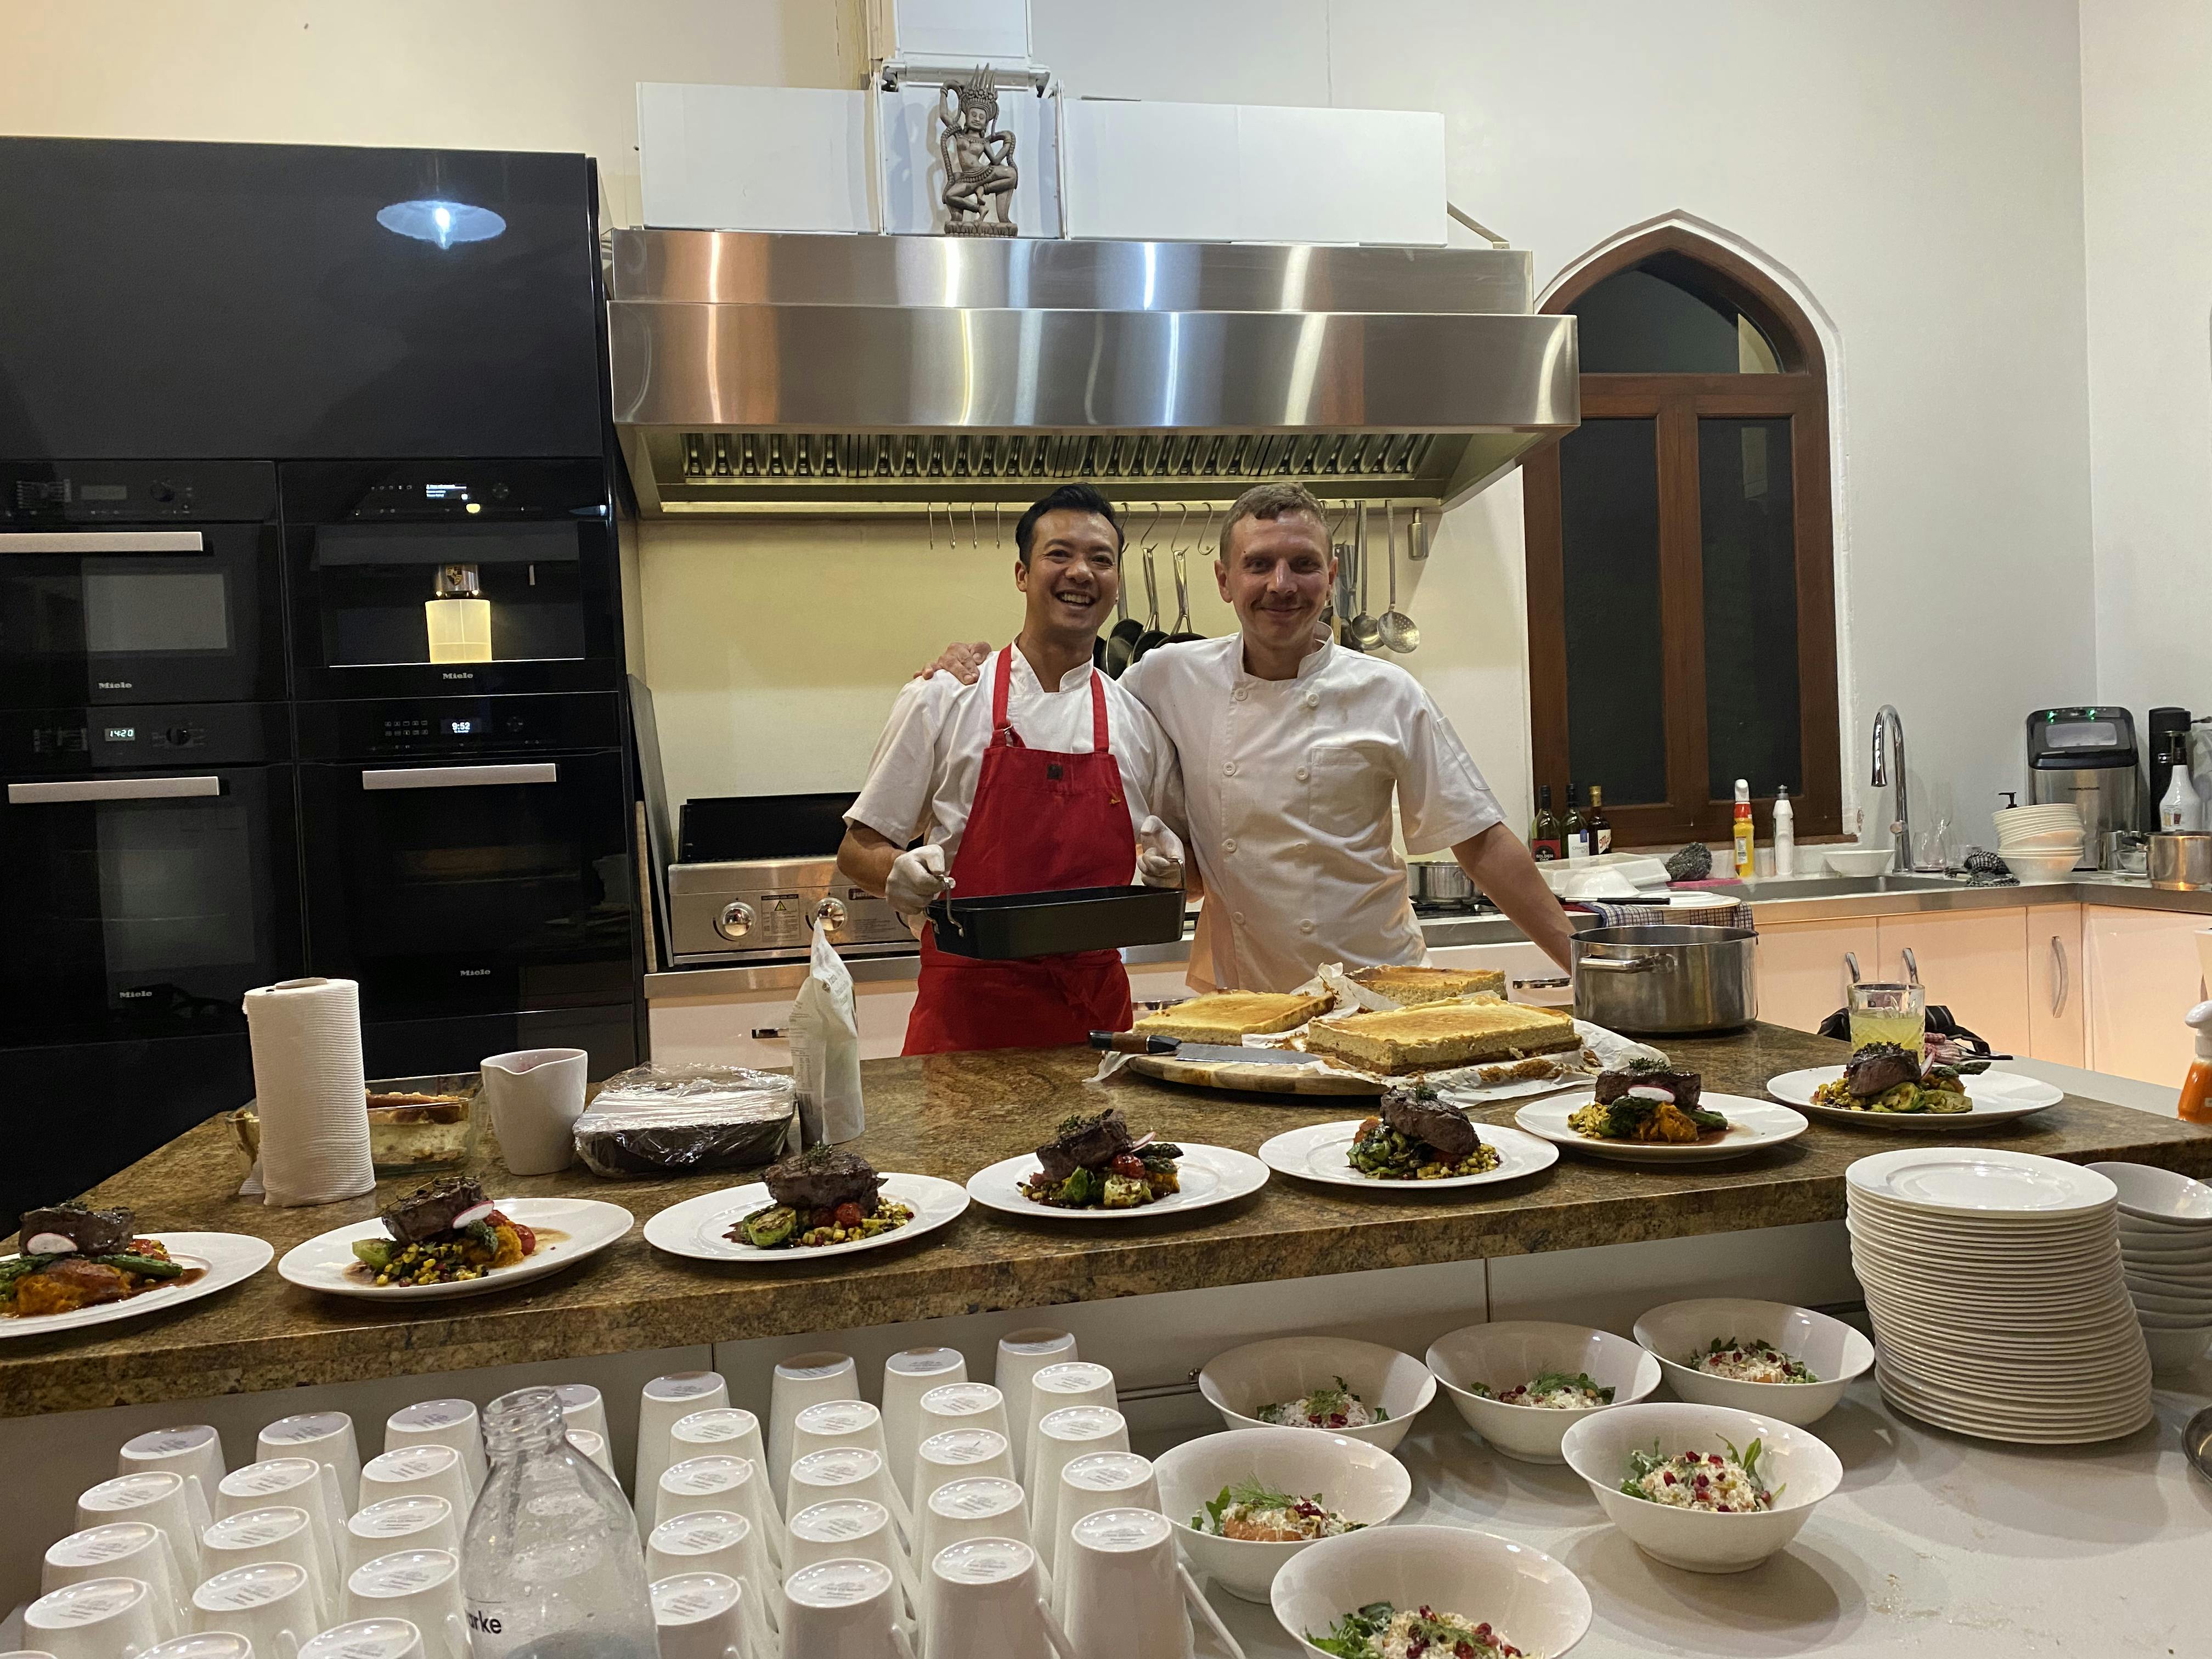 Two of our special chefs and dear friends cooking up a magnificent meal for 40 of our friends